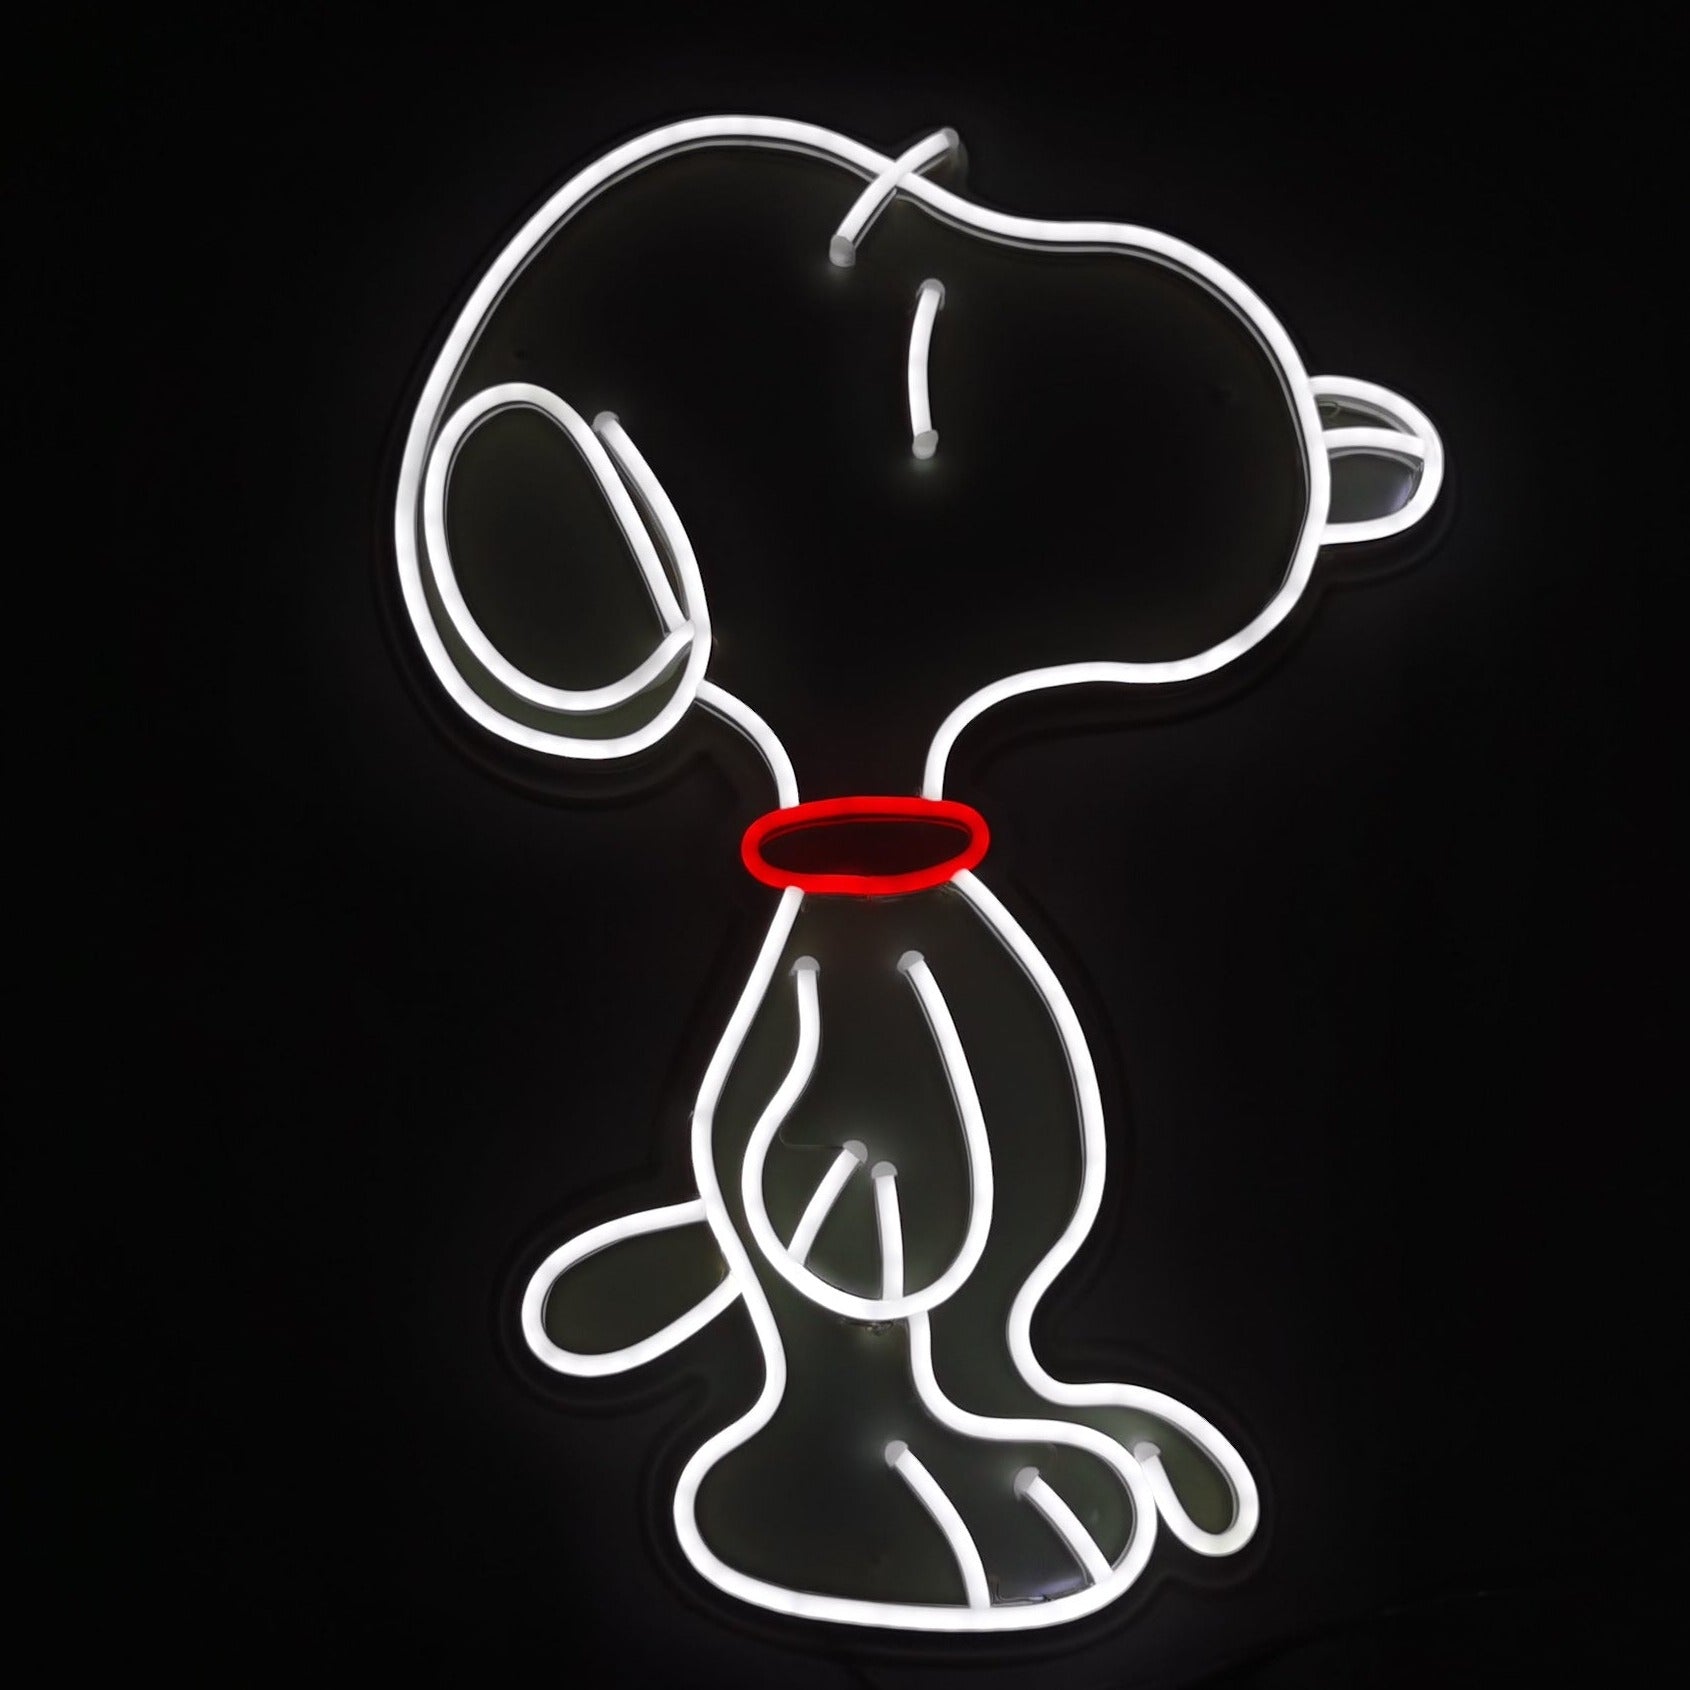 snoopy pictures